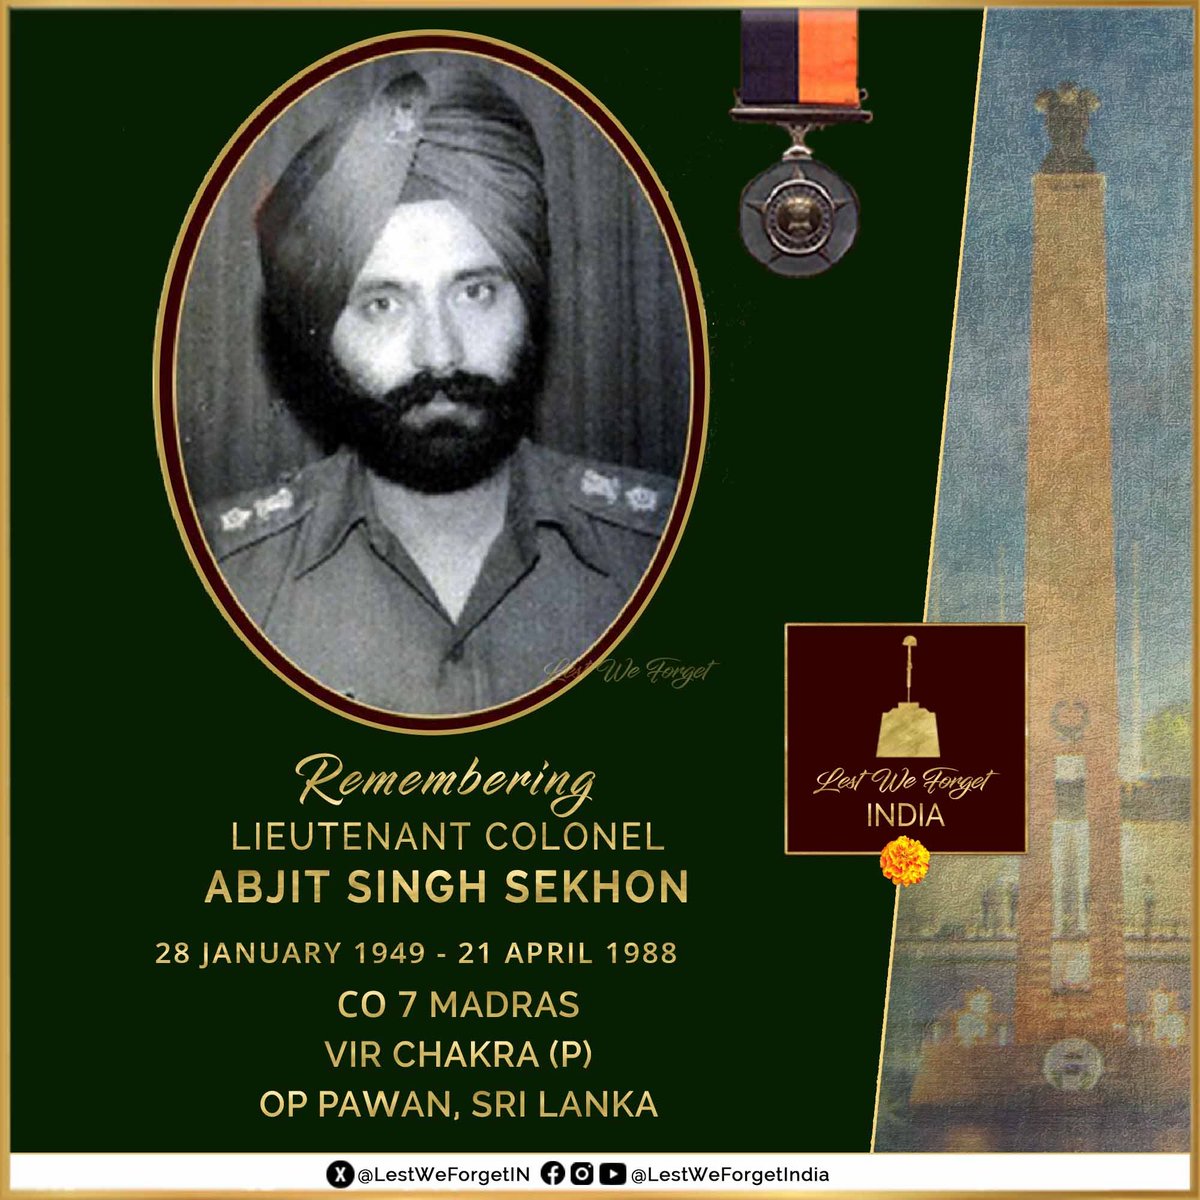 Supreme sacrifice in a war far away #LestWeForgetIndia🇮🇳 Lieutenant Colonel Abjit Singh Sekhon, #VirChakra (P), Commanding Officer 7 MADRAS laid down his life leading from the front- fighting the LTTE, #OnThisDay 21 April in 1988 in Sri Lanka, during #OpPawan Lt Col Sekhon,